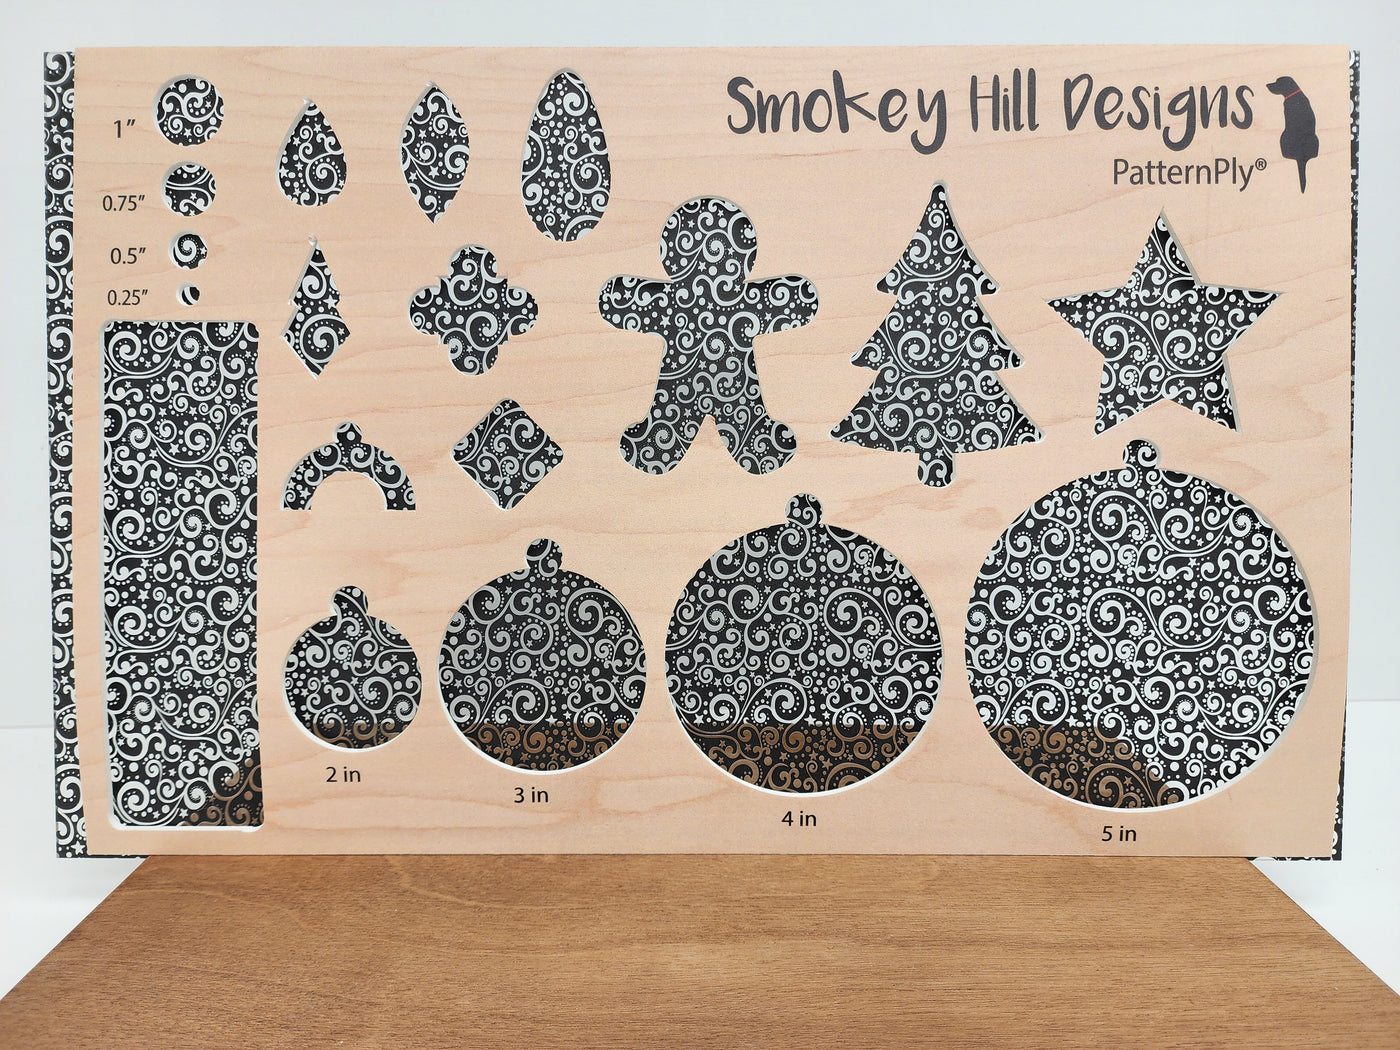 PatternPly® Scattered Christmas Scrolls BLACK